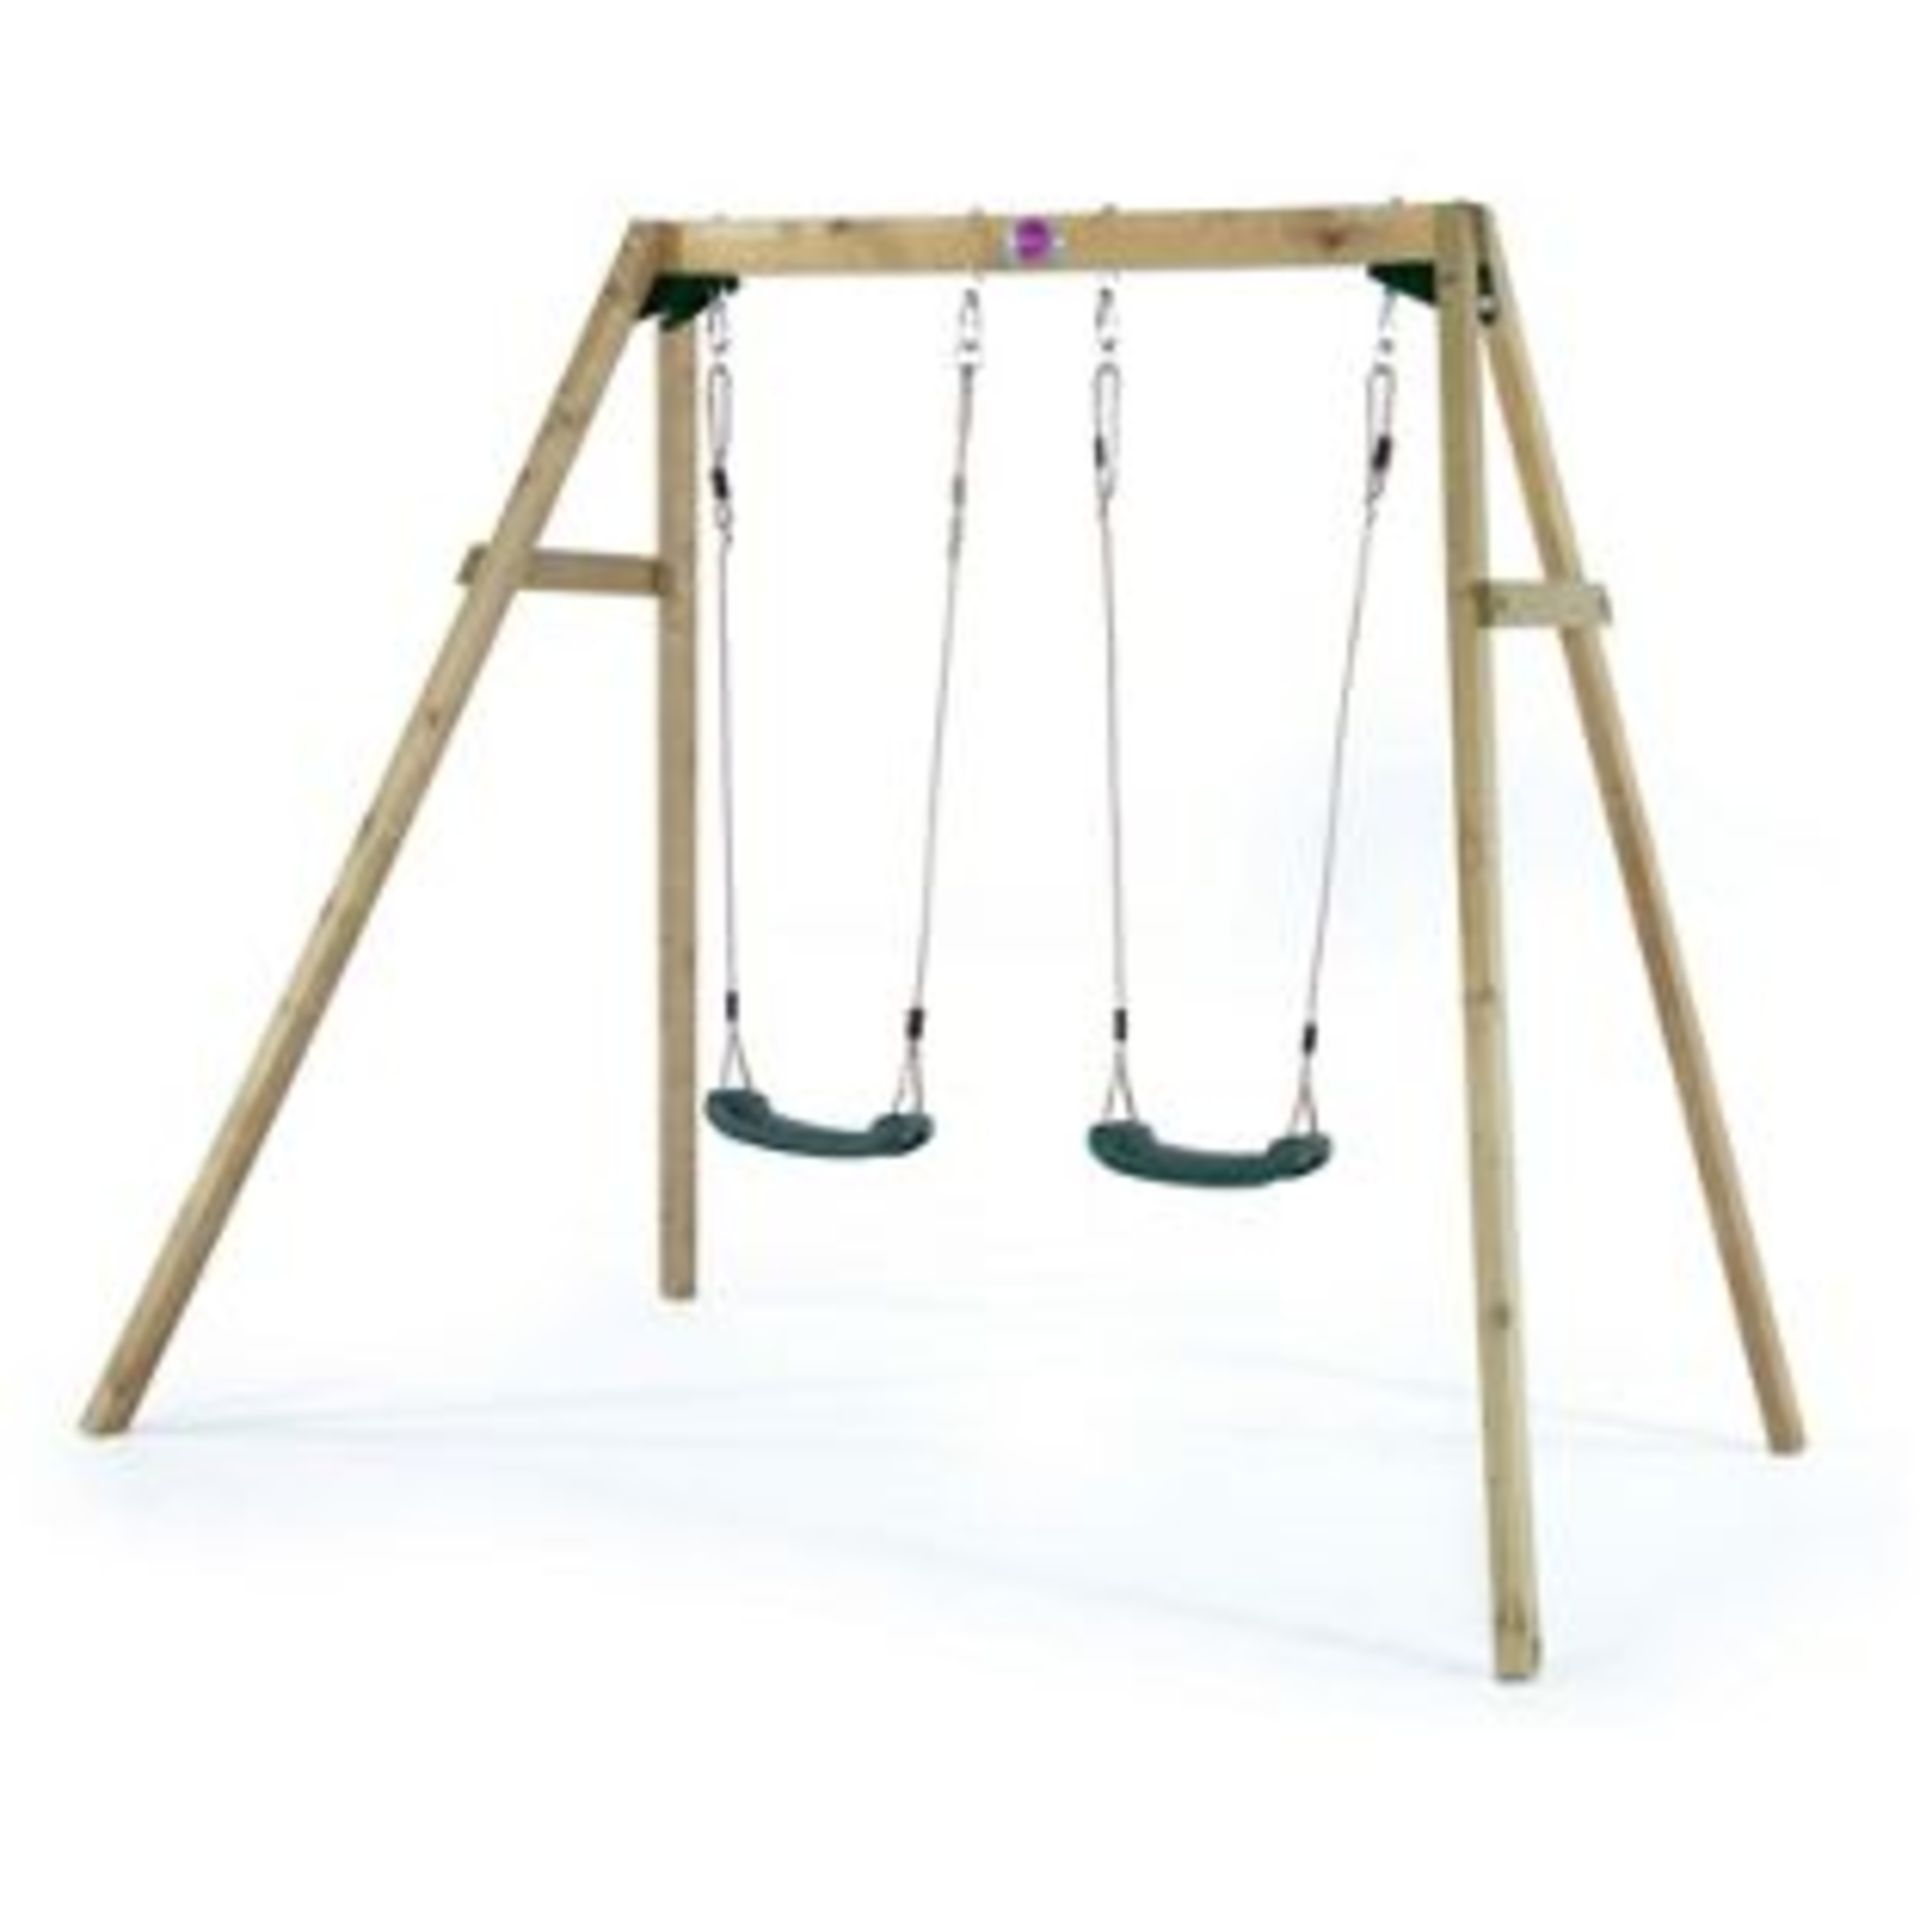 1 x Plum Wooden Double Swing Set. RRP £199.99. Double the seats for twice the fun! Children will - Image 5 of 5